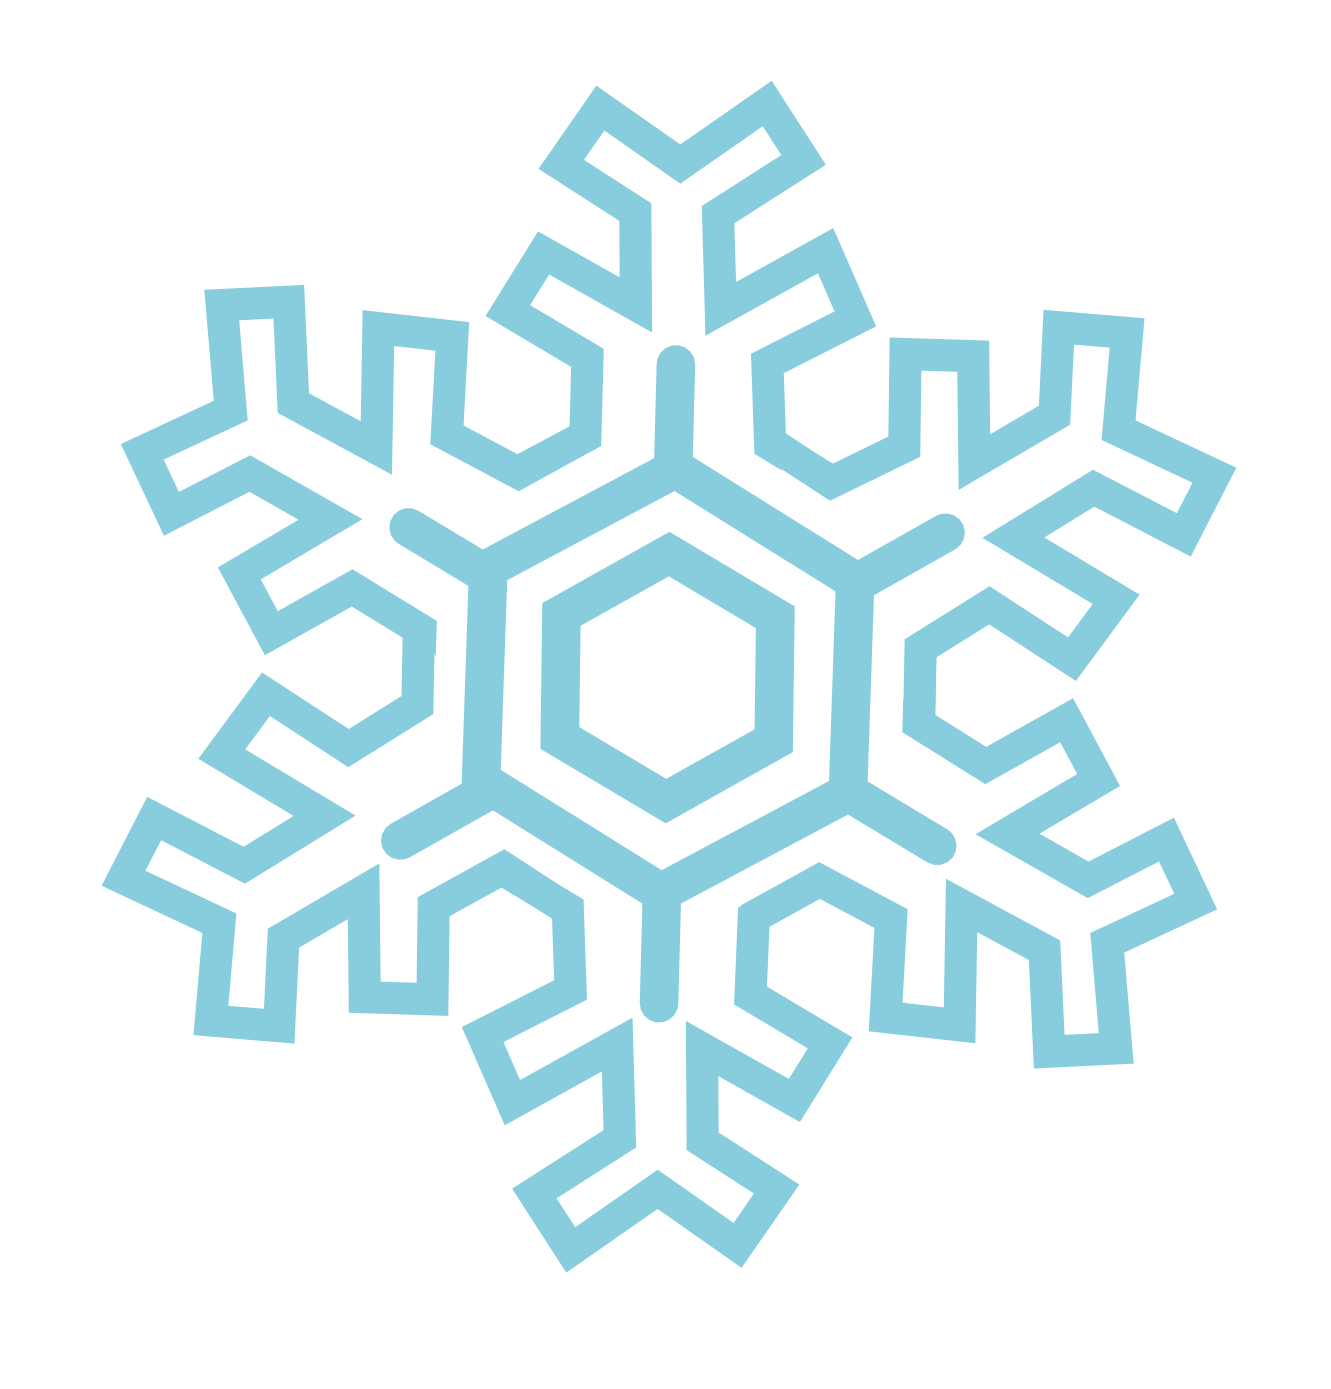 Clipart snowflake logo. Second pride in camp